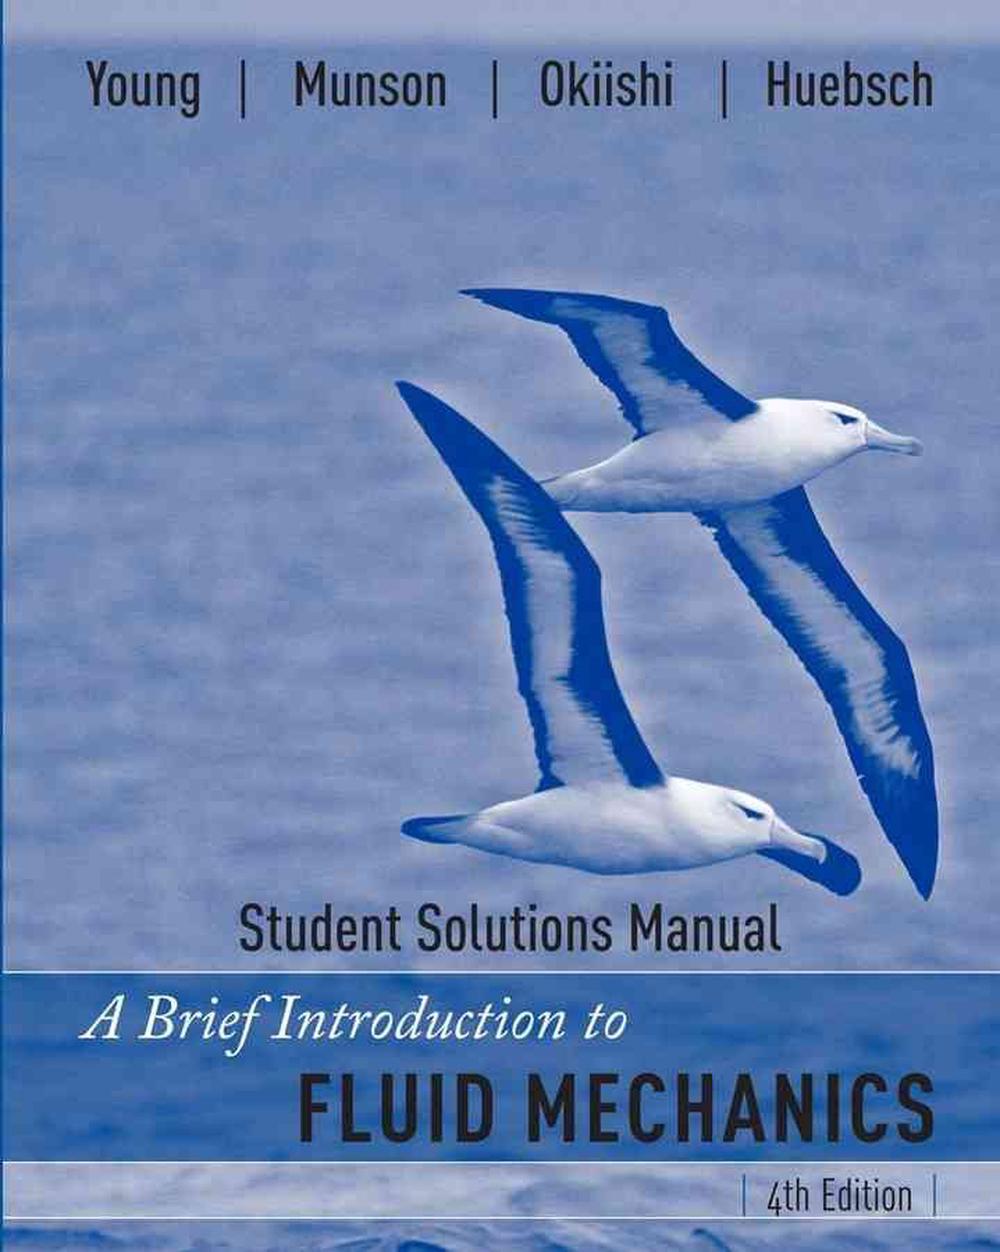 A Brief Introduction to Fluid Mechanics, Student Solutions Manual by